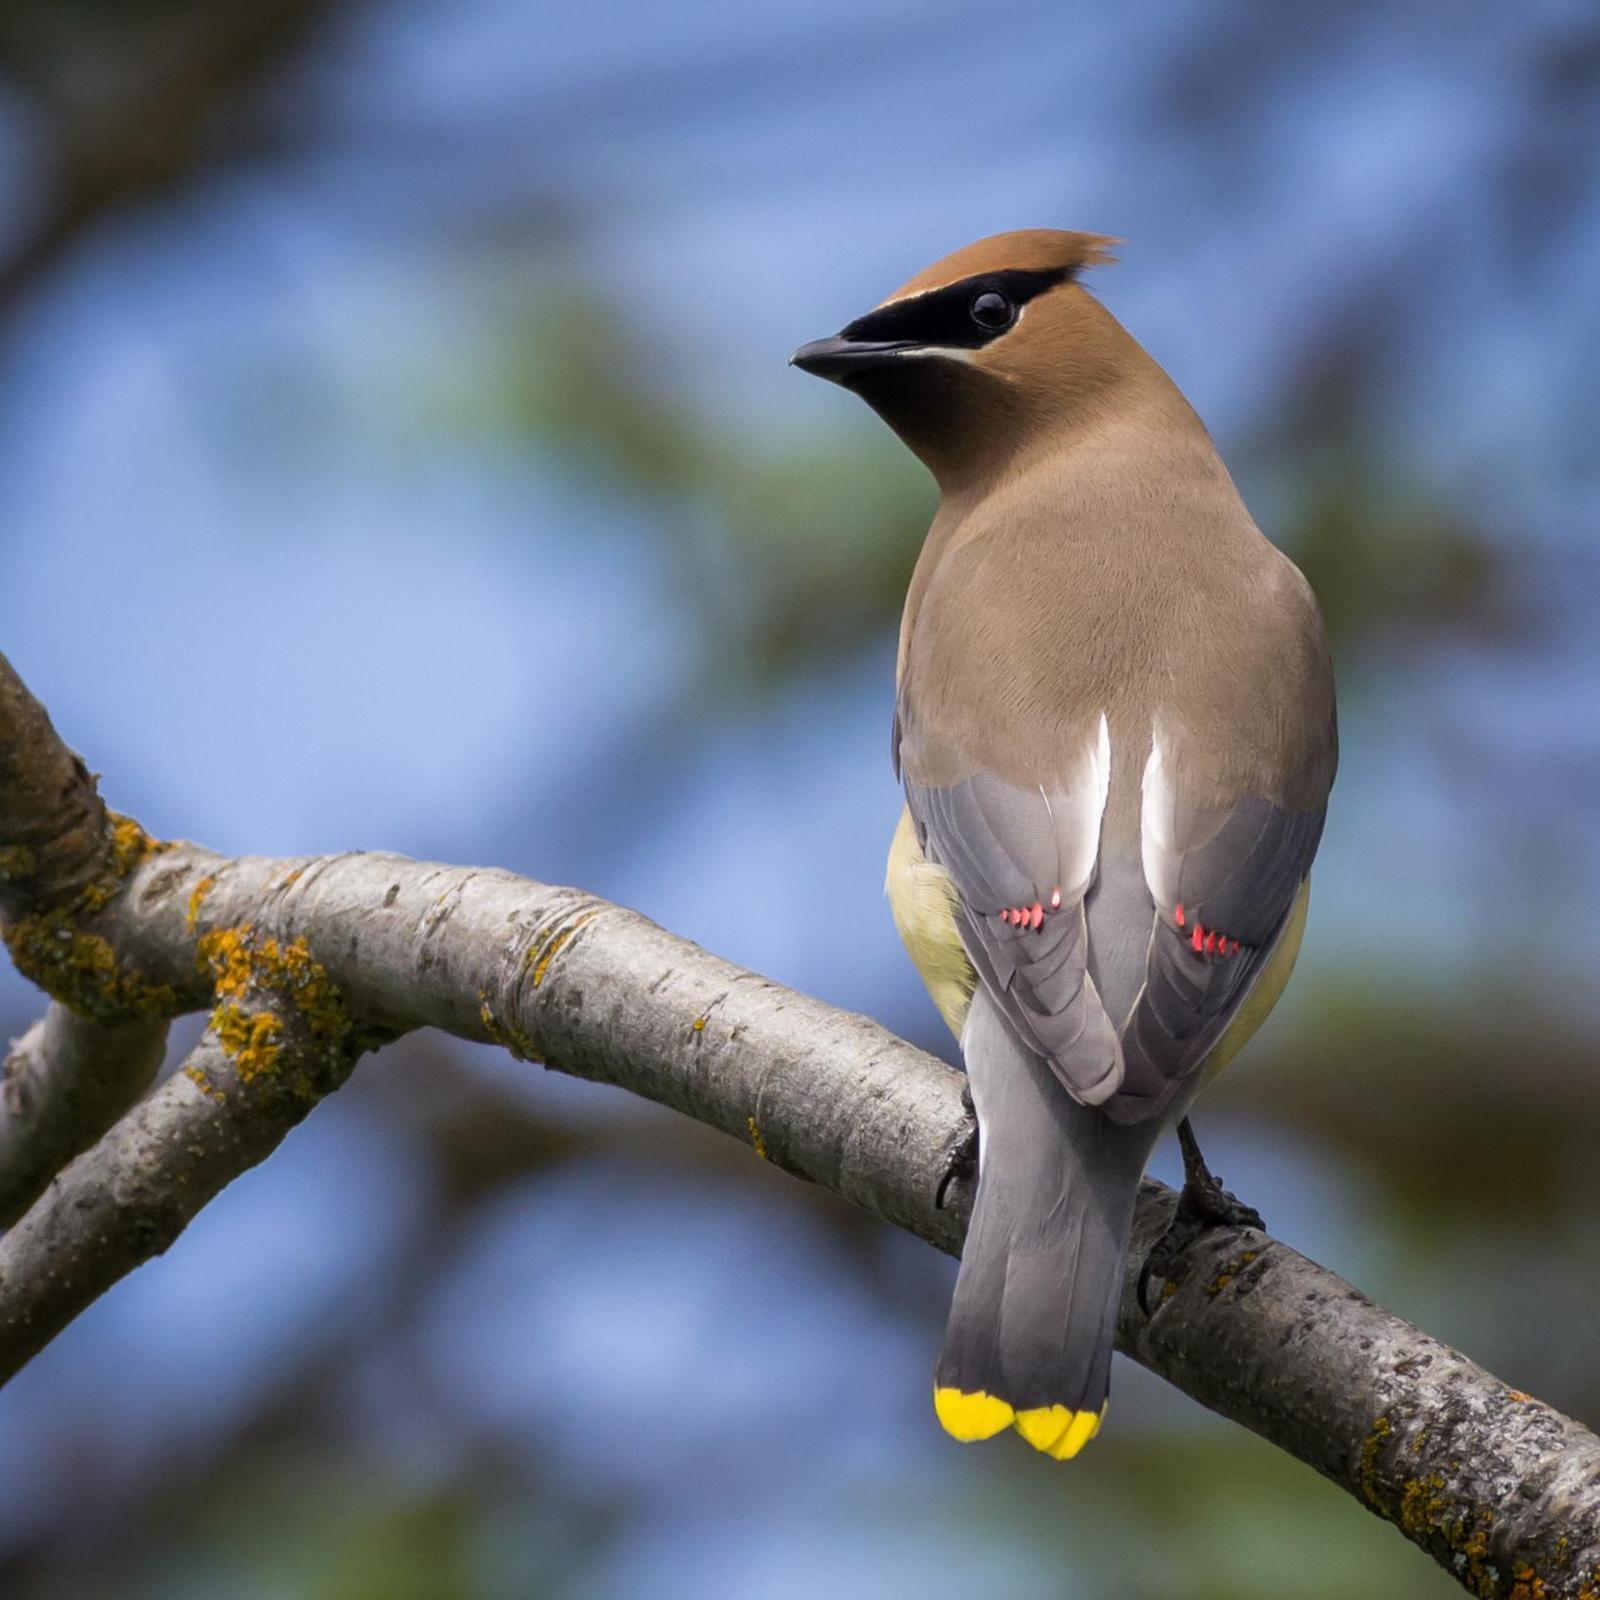 Cedar Waxwing Photo by Jesse Hodges